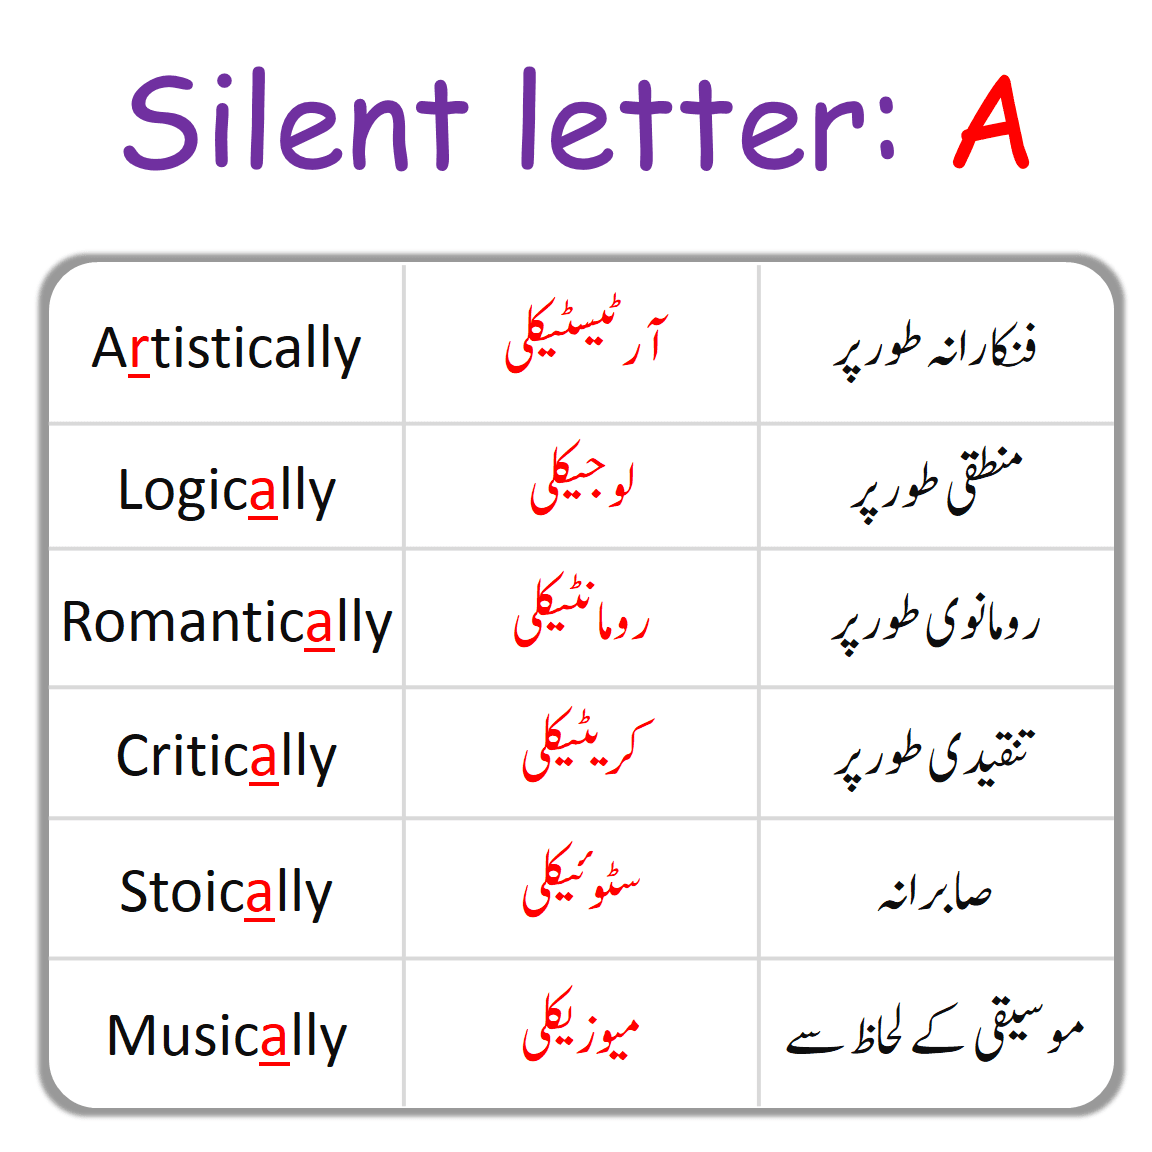 A Silent Letter in English with Urdu Examples